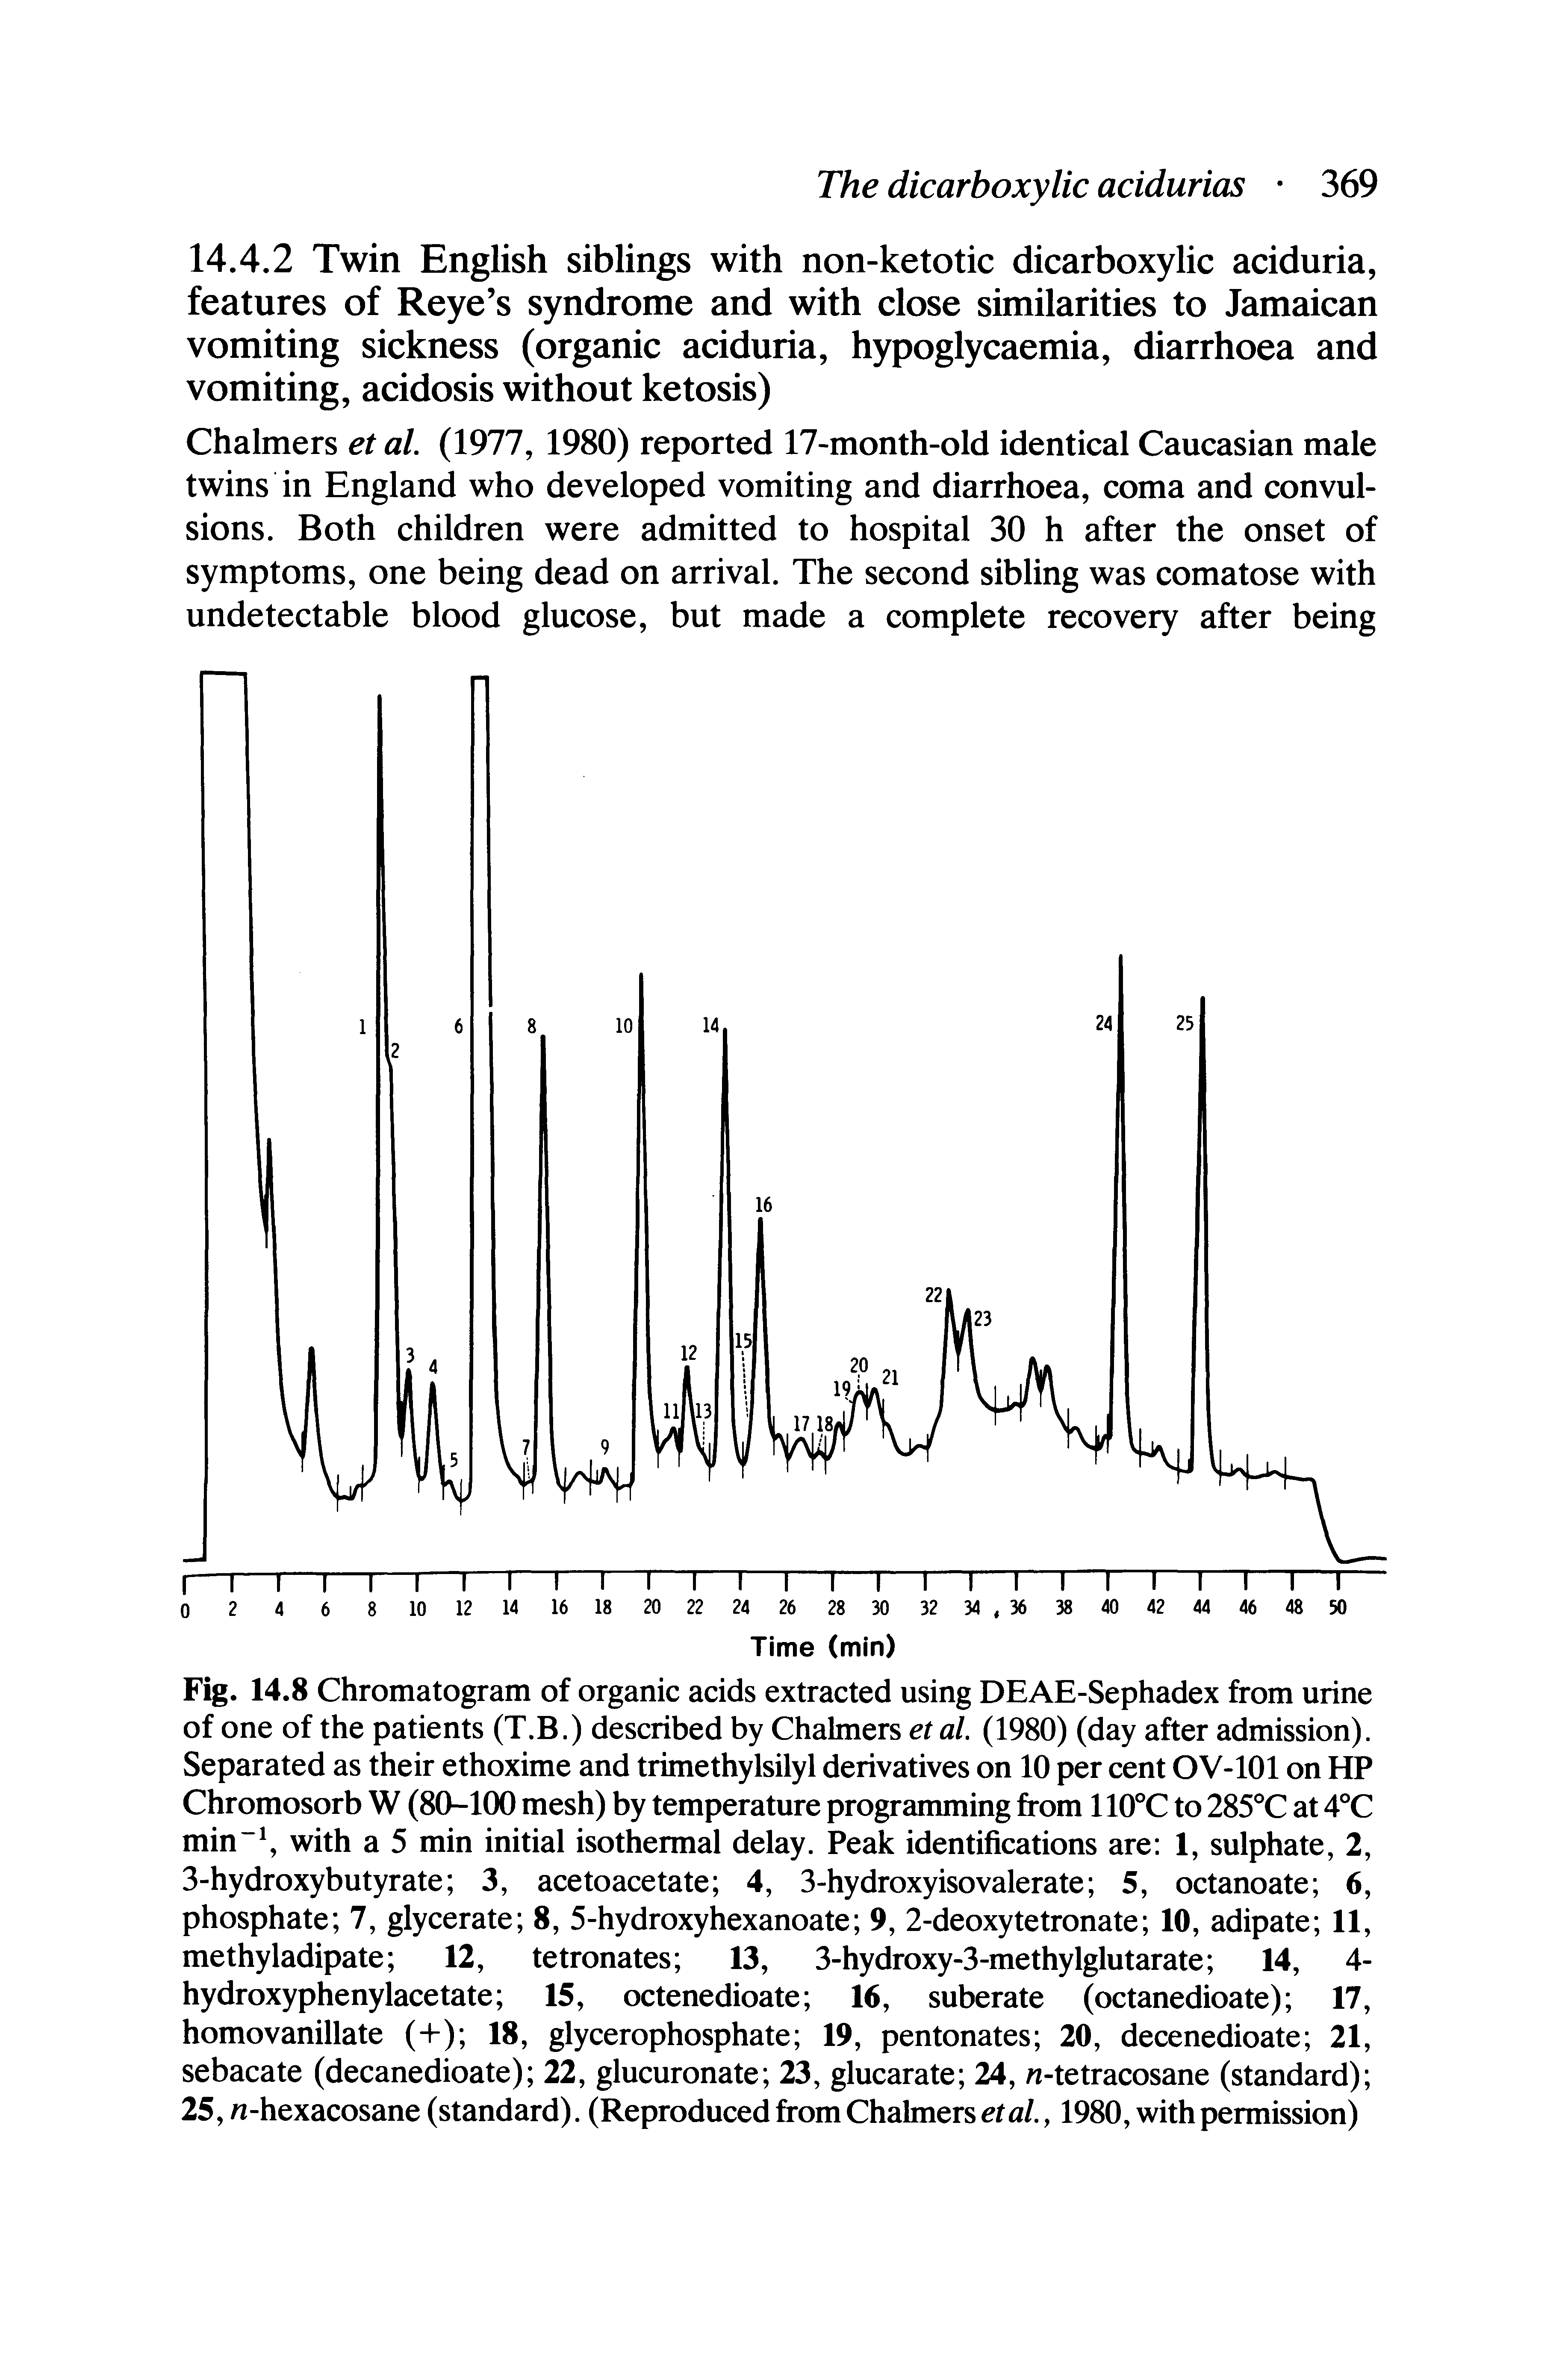 Fig. 14.8 Chromatogram of organic acids extracted using DEAE-Sephadex from urine of one of the patients (T.B.) described by Chalmers et al. (1980) (day after admission). Separated as their ethoxime and trimethylsilyl derivatives on 10 per cent OV-101 on HP Chromosorb W (80-100 mesh) by temperature programming from 110°C to 285°C at 4°C min with a 5 min initial isothermal delay. Peak identifications are 1, sulphate, 2, 3-hydroxybutyrate 3, acetoacetate 4, 3-hydroxyisovalerate 5, octanoate 6, phosphate 7, glycerate 8, 5-hydroxyhexanoate 9, 2-deoxytetronate 10, adipate 11, methyladipate 12, tetronates 13, 3-hydroxy-3-methylglutarate 14, 4-...